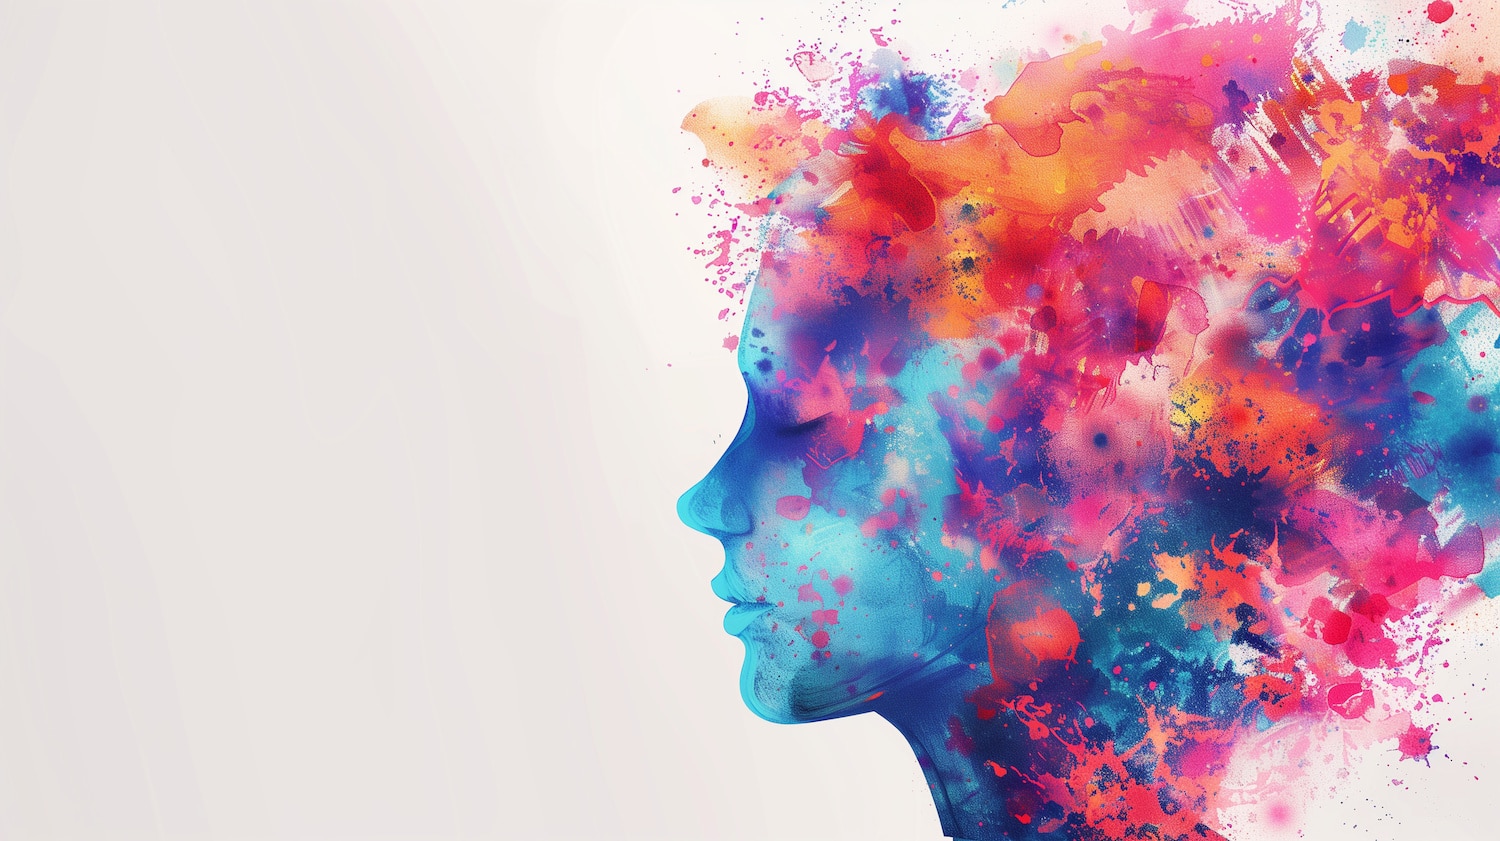 Abstract illustration of mental health - colorful painting of a young woman